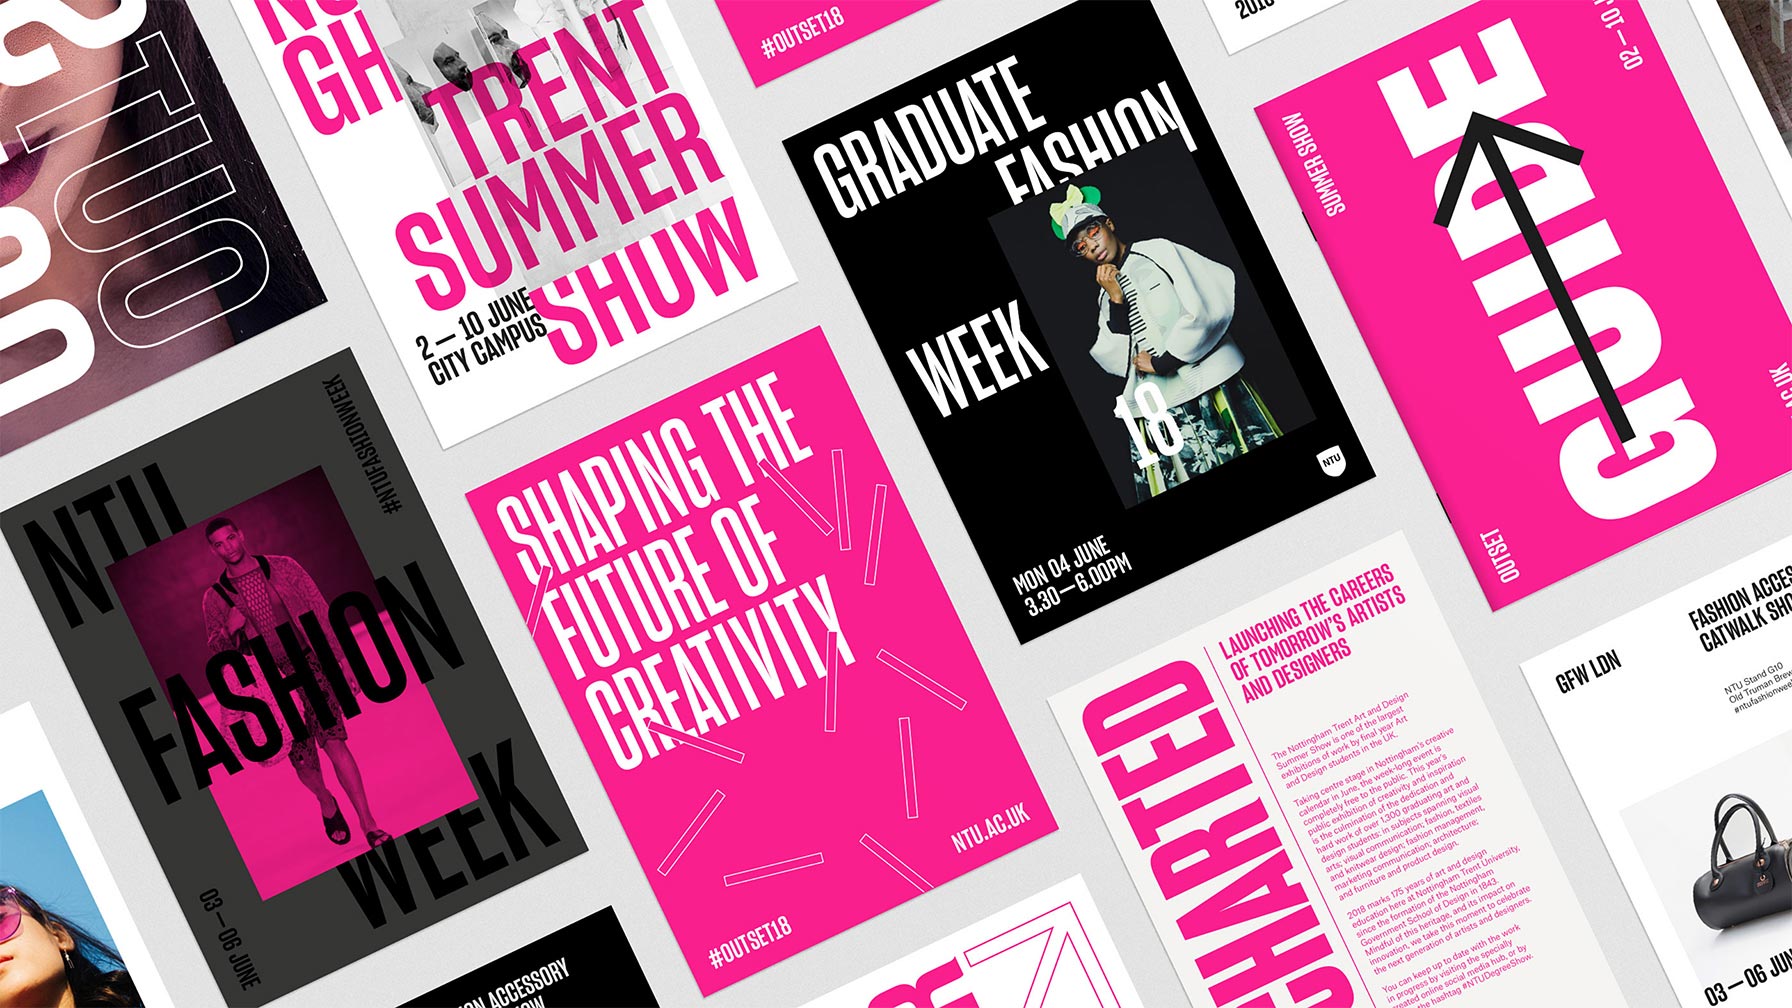 Outset degree show graphic design flyers shown in grid formation